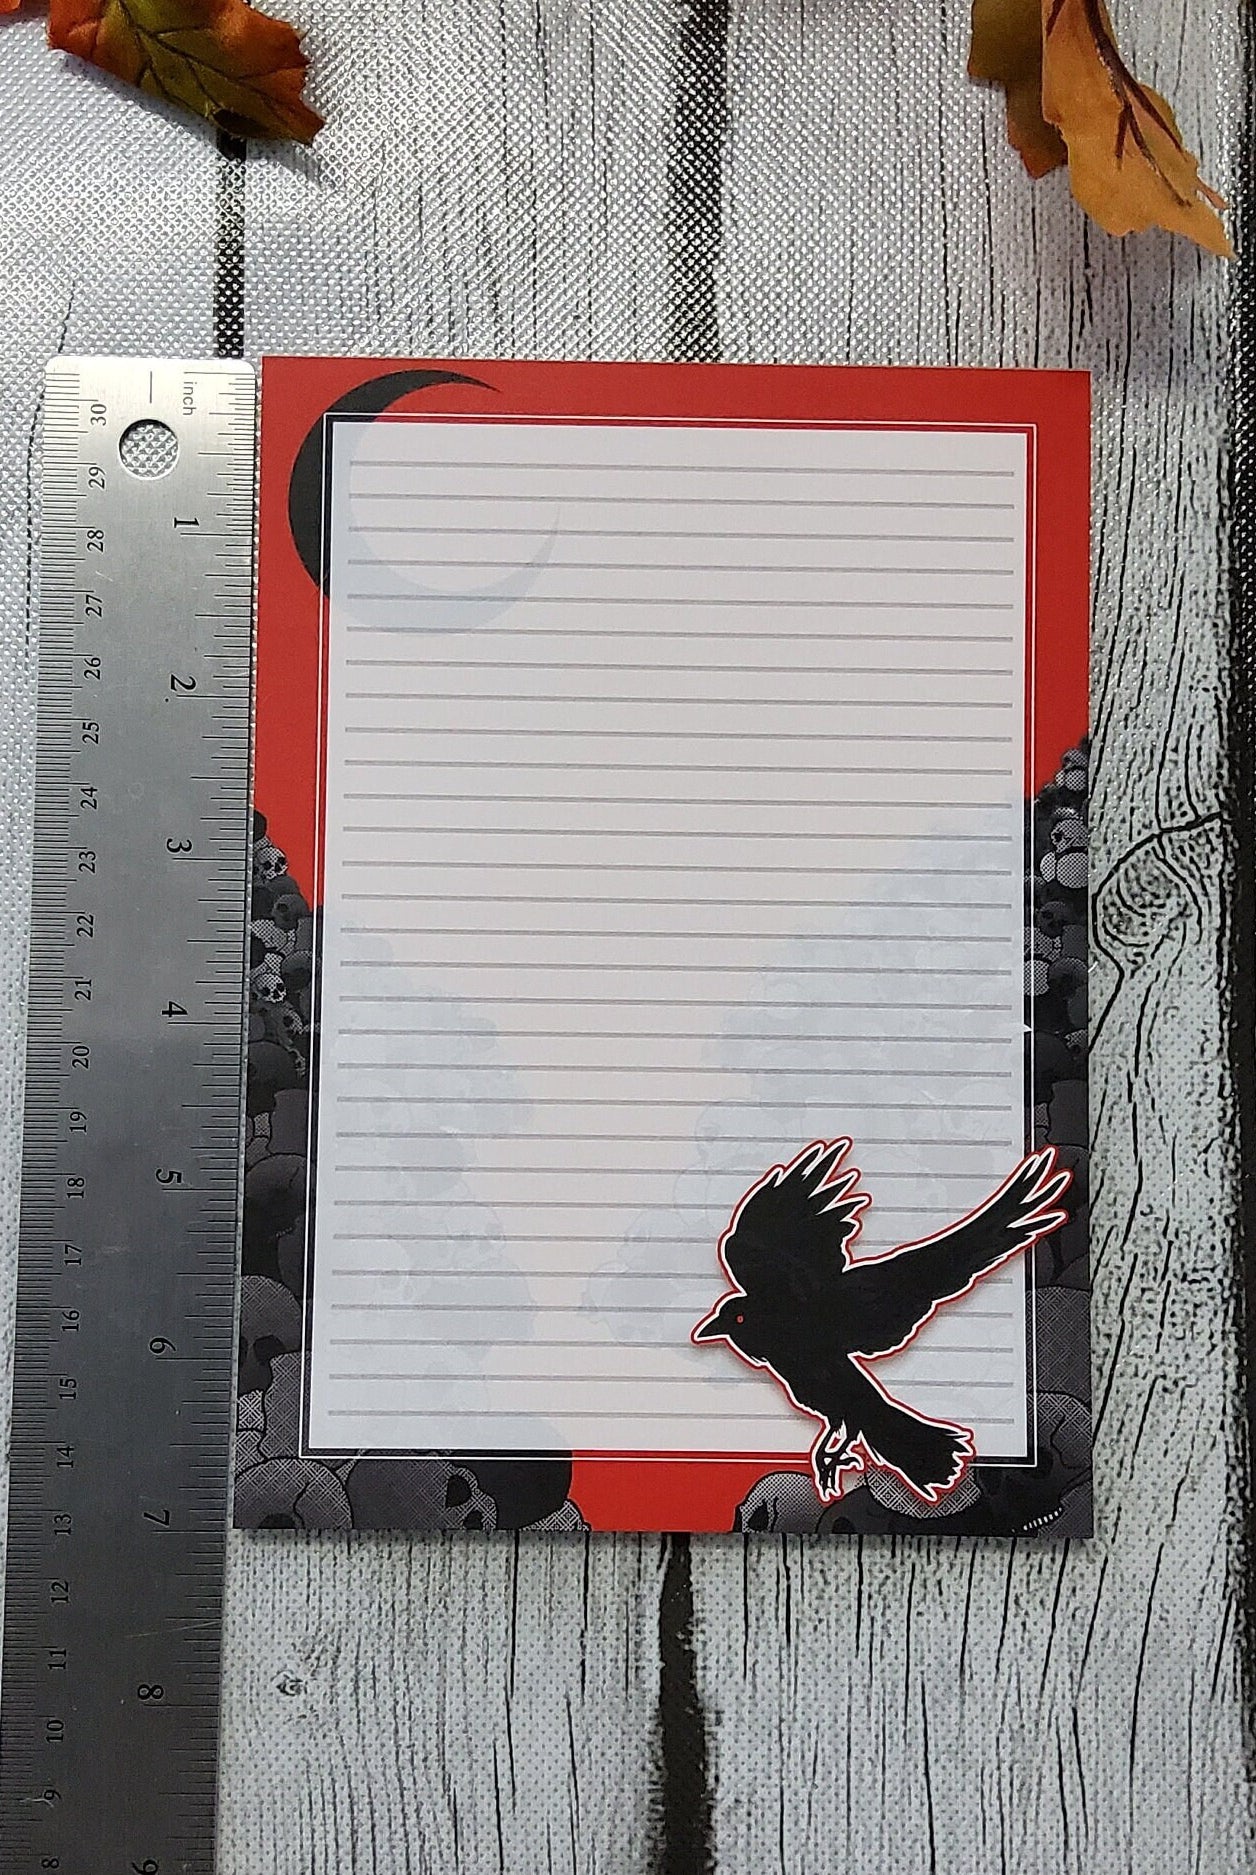 NOTEPAD: Crow and Skulls with Black Moon , Red Sky and Crow Notepad , Crow and Skulls , Red Sky Omen Lined Notepad